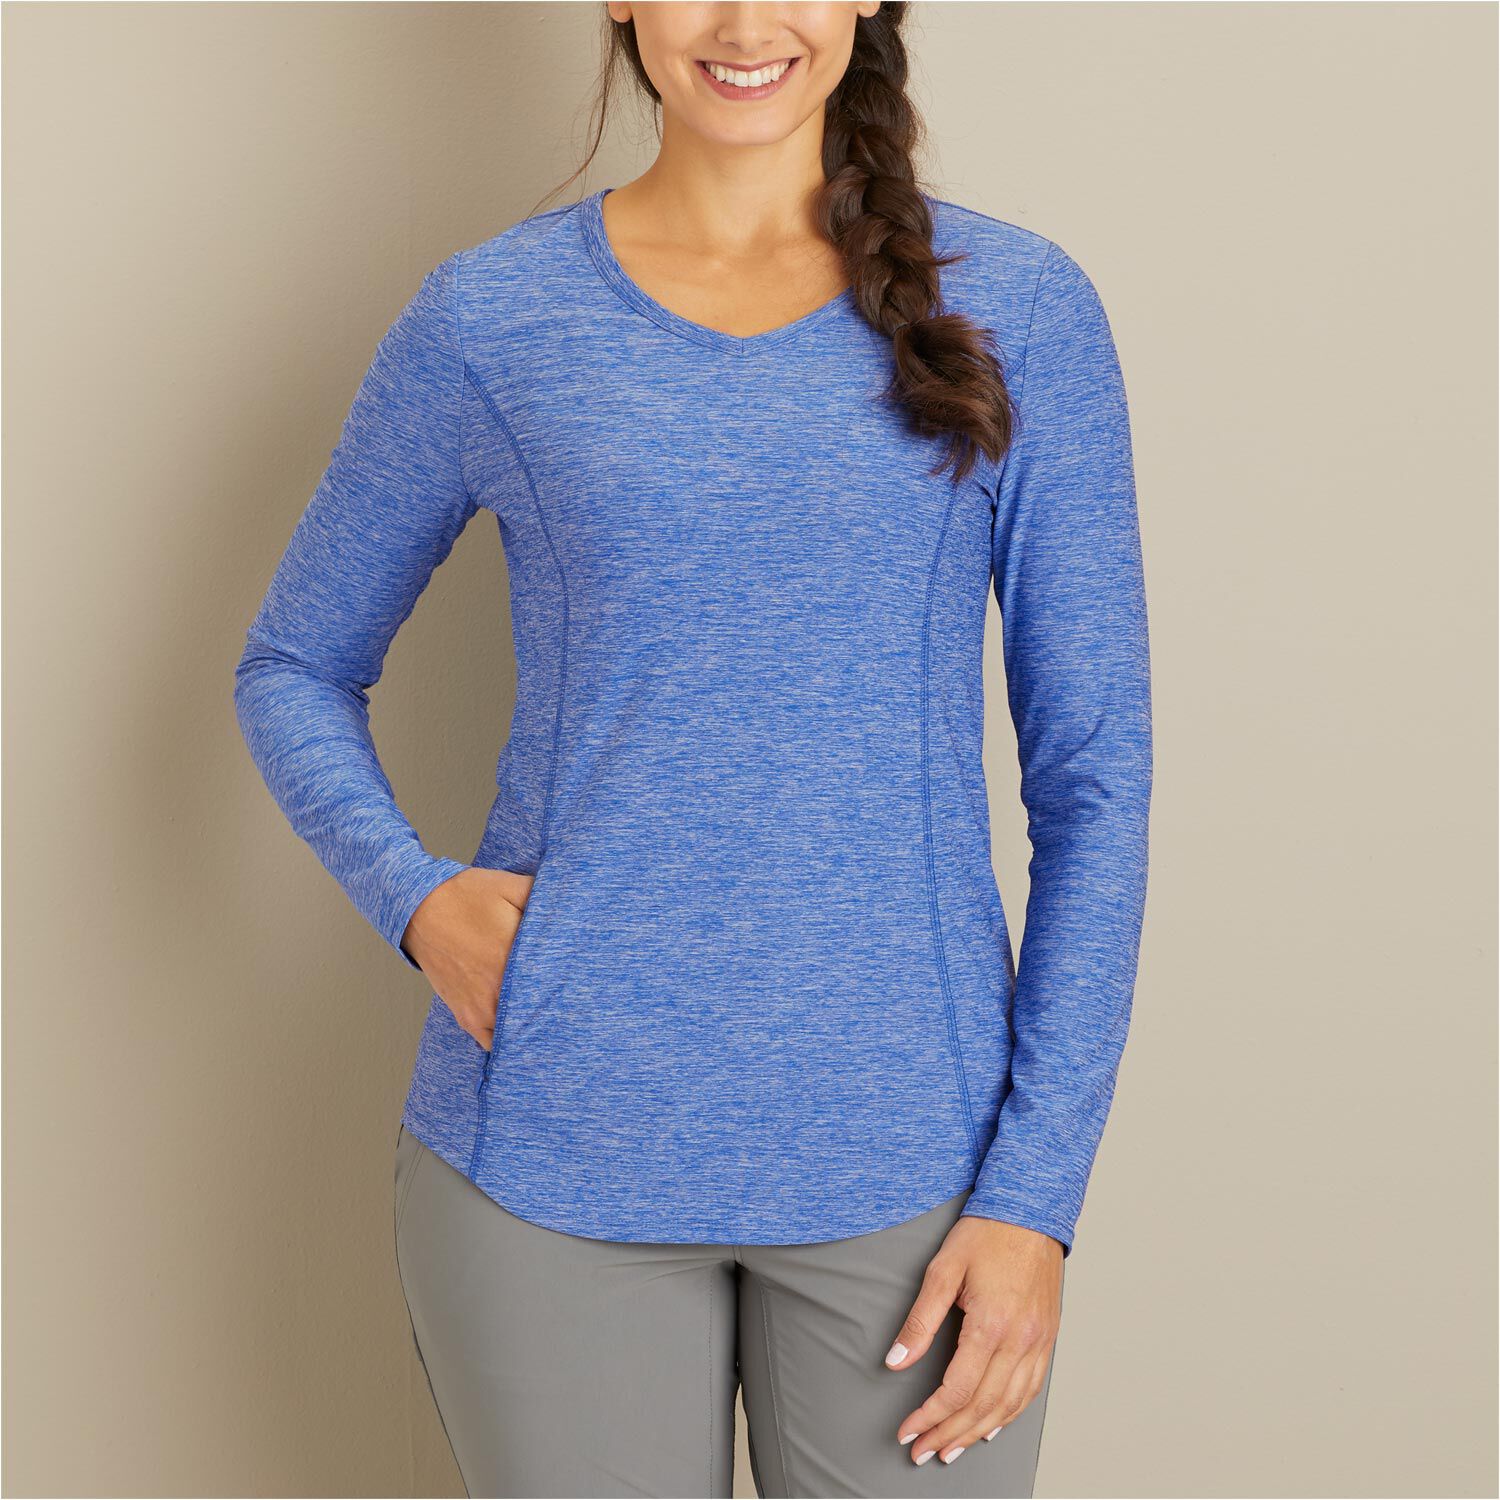 Women's Armachillo Cooling Long Sleeve T-Shirt | Duluth Trading